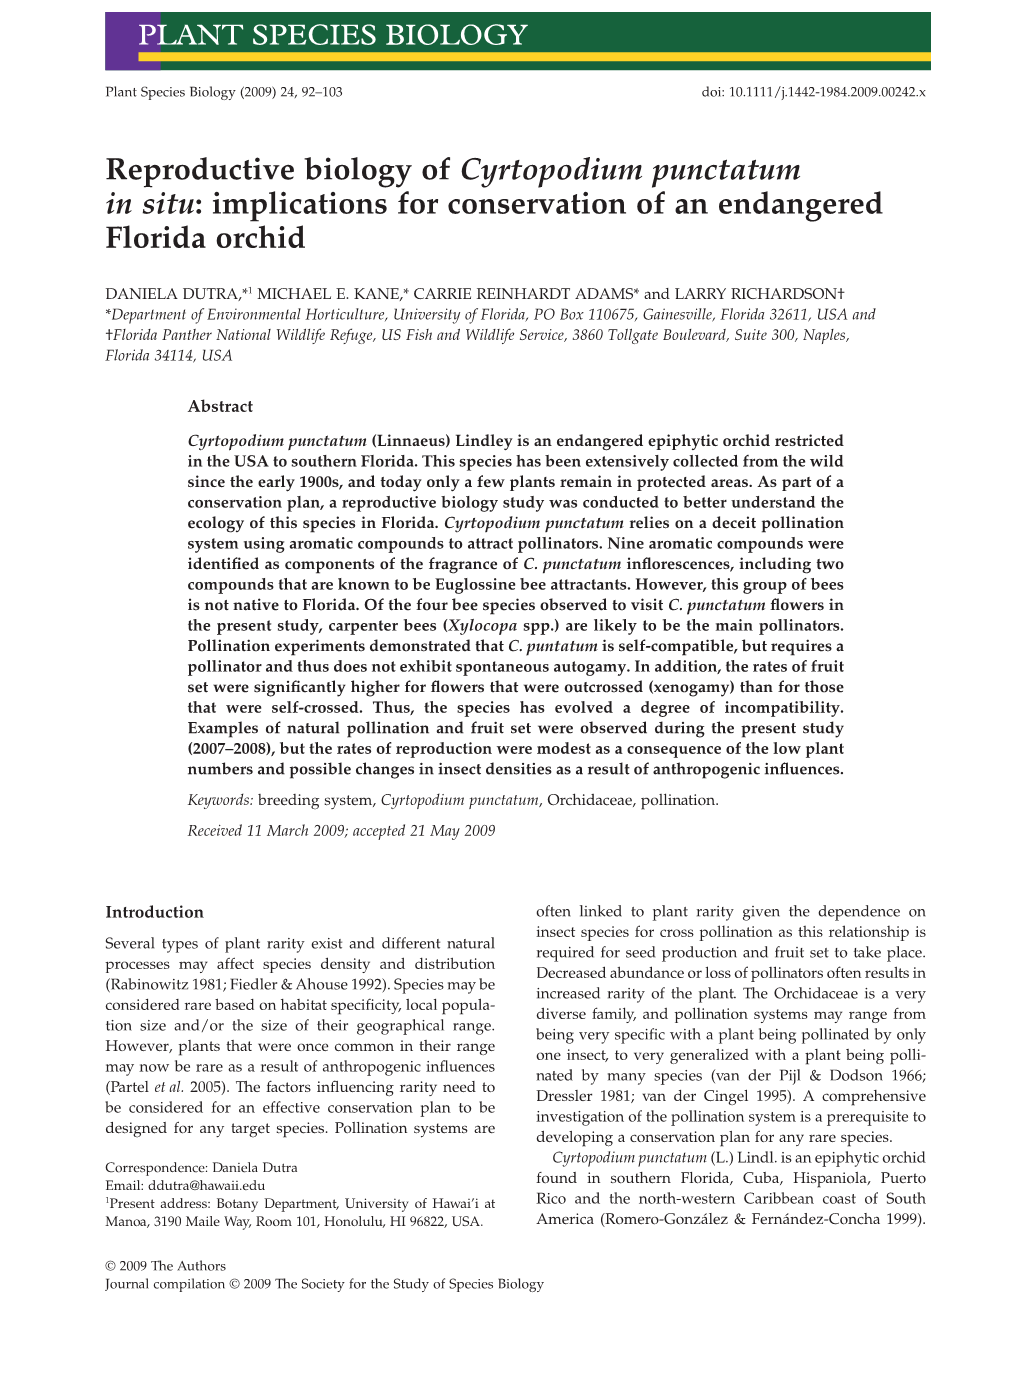 Reproductive Biology of Cyrtopodium Punctatum in Situ: Implications for Conservation of an Endangered Florida Orchid